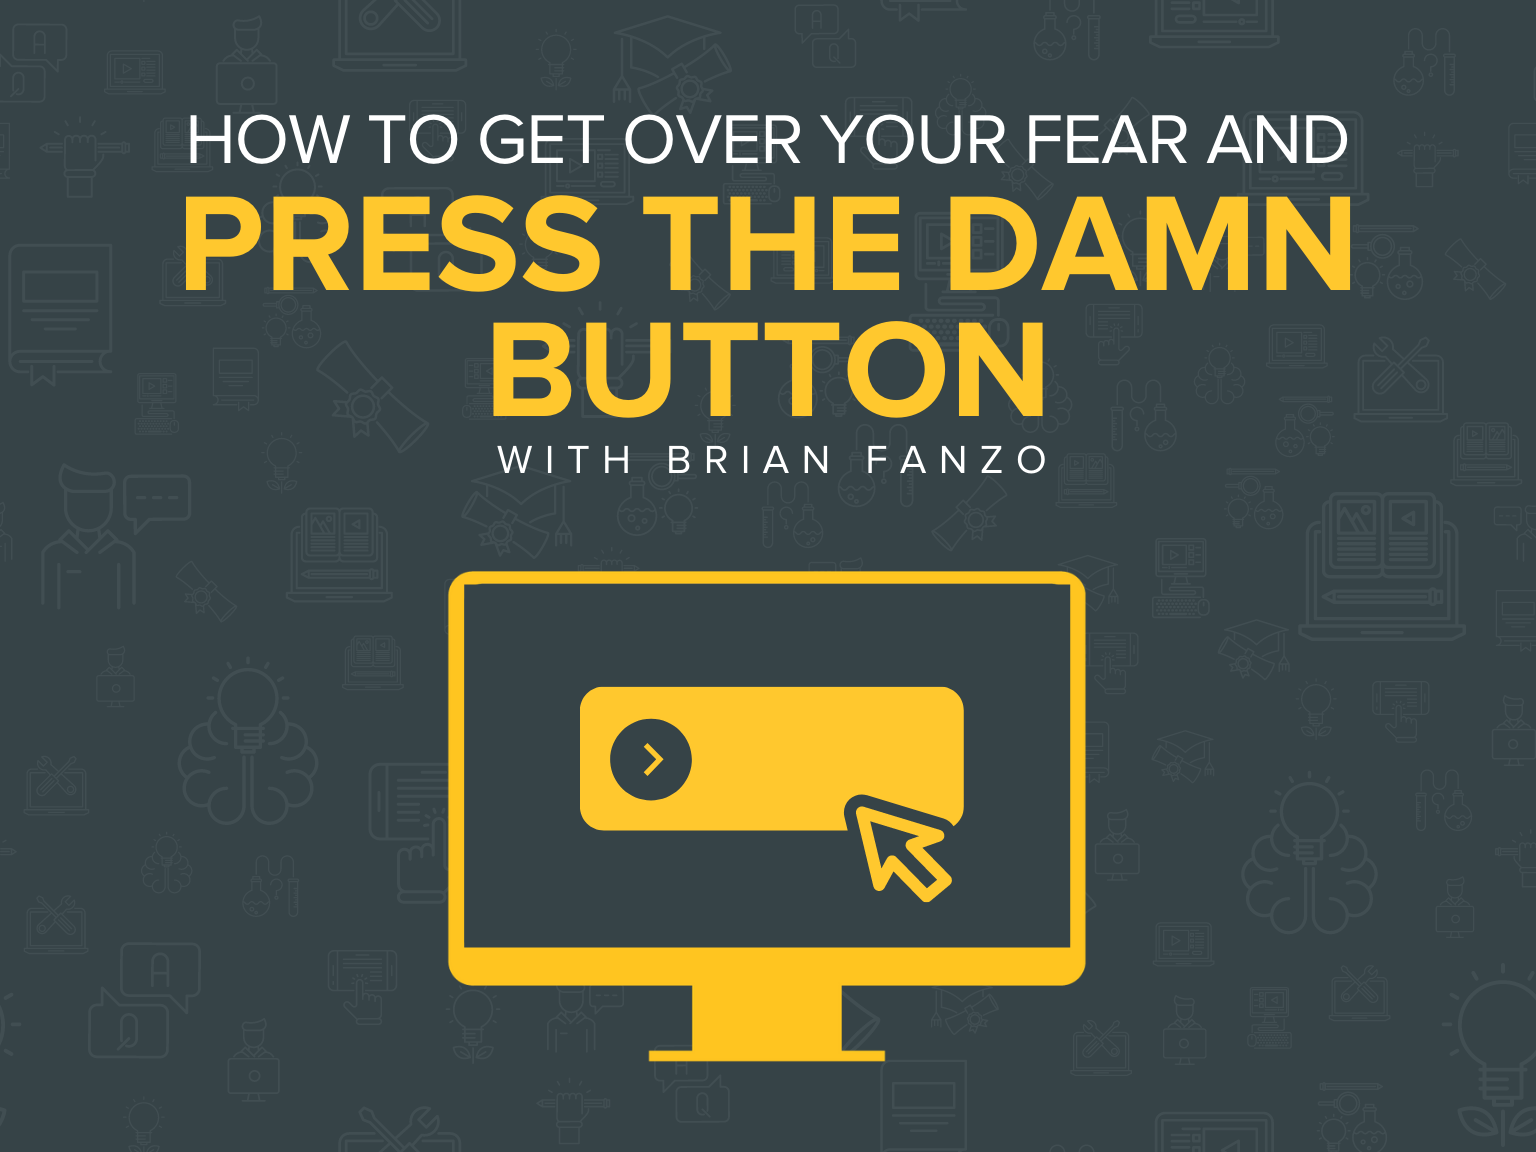 How To Get Over Your Fear And Press The Damn Button with Brian Fanzo